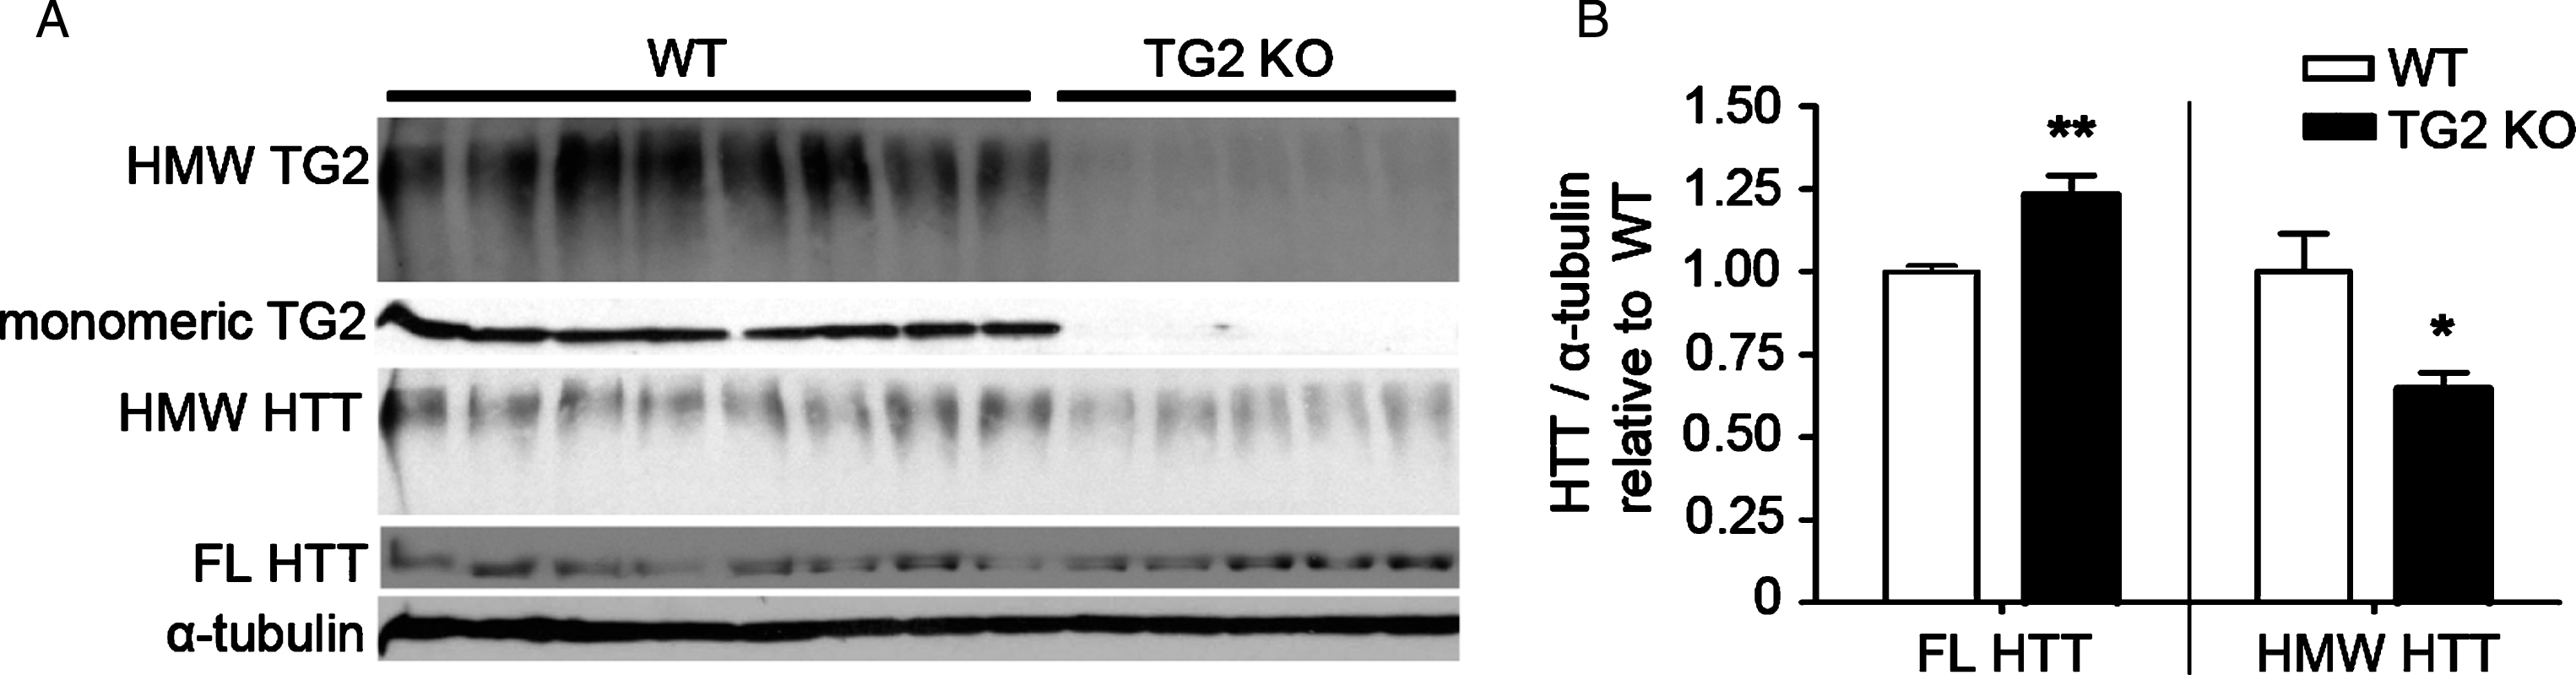 TG2 knockout in WT cortex increases levels of monomeric WT HTT and reduces levels of WT HMW HTT detected with anti-HTT VB3130. (A) Western blots of full-length (FL) HTT (∼350 kDa), high molecular weight (HMW) HTT species (running at the top of the separating gel), HMW TG2 species (running at the top of the separating gel), monomeric TG2 (75kD), and α-tubulin loading control (50kD) were detected in cortical lysates from 8 WT control vs. 5 TG2 knockout mice. (B) Graphs show mean+SEM and statistics were done by Student’s t-test: **p < 0.01, *p < 0.05.